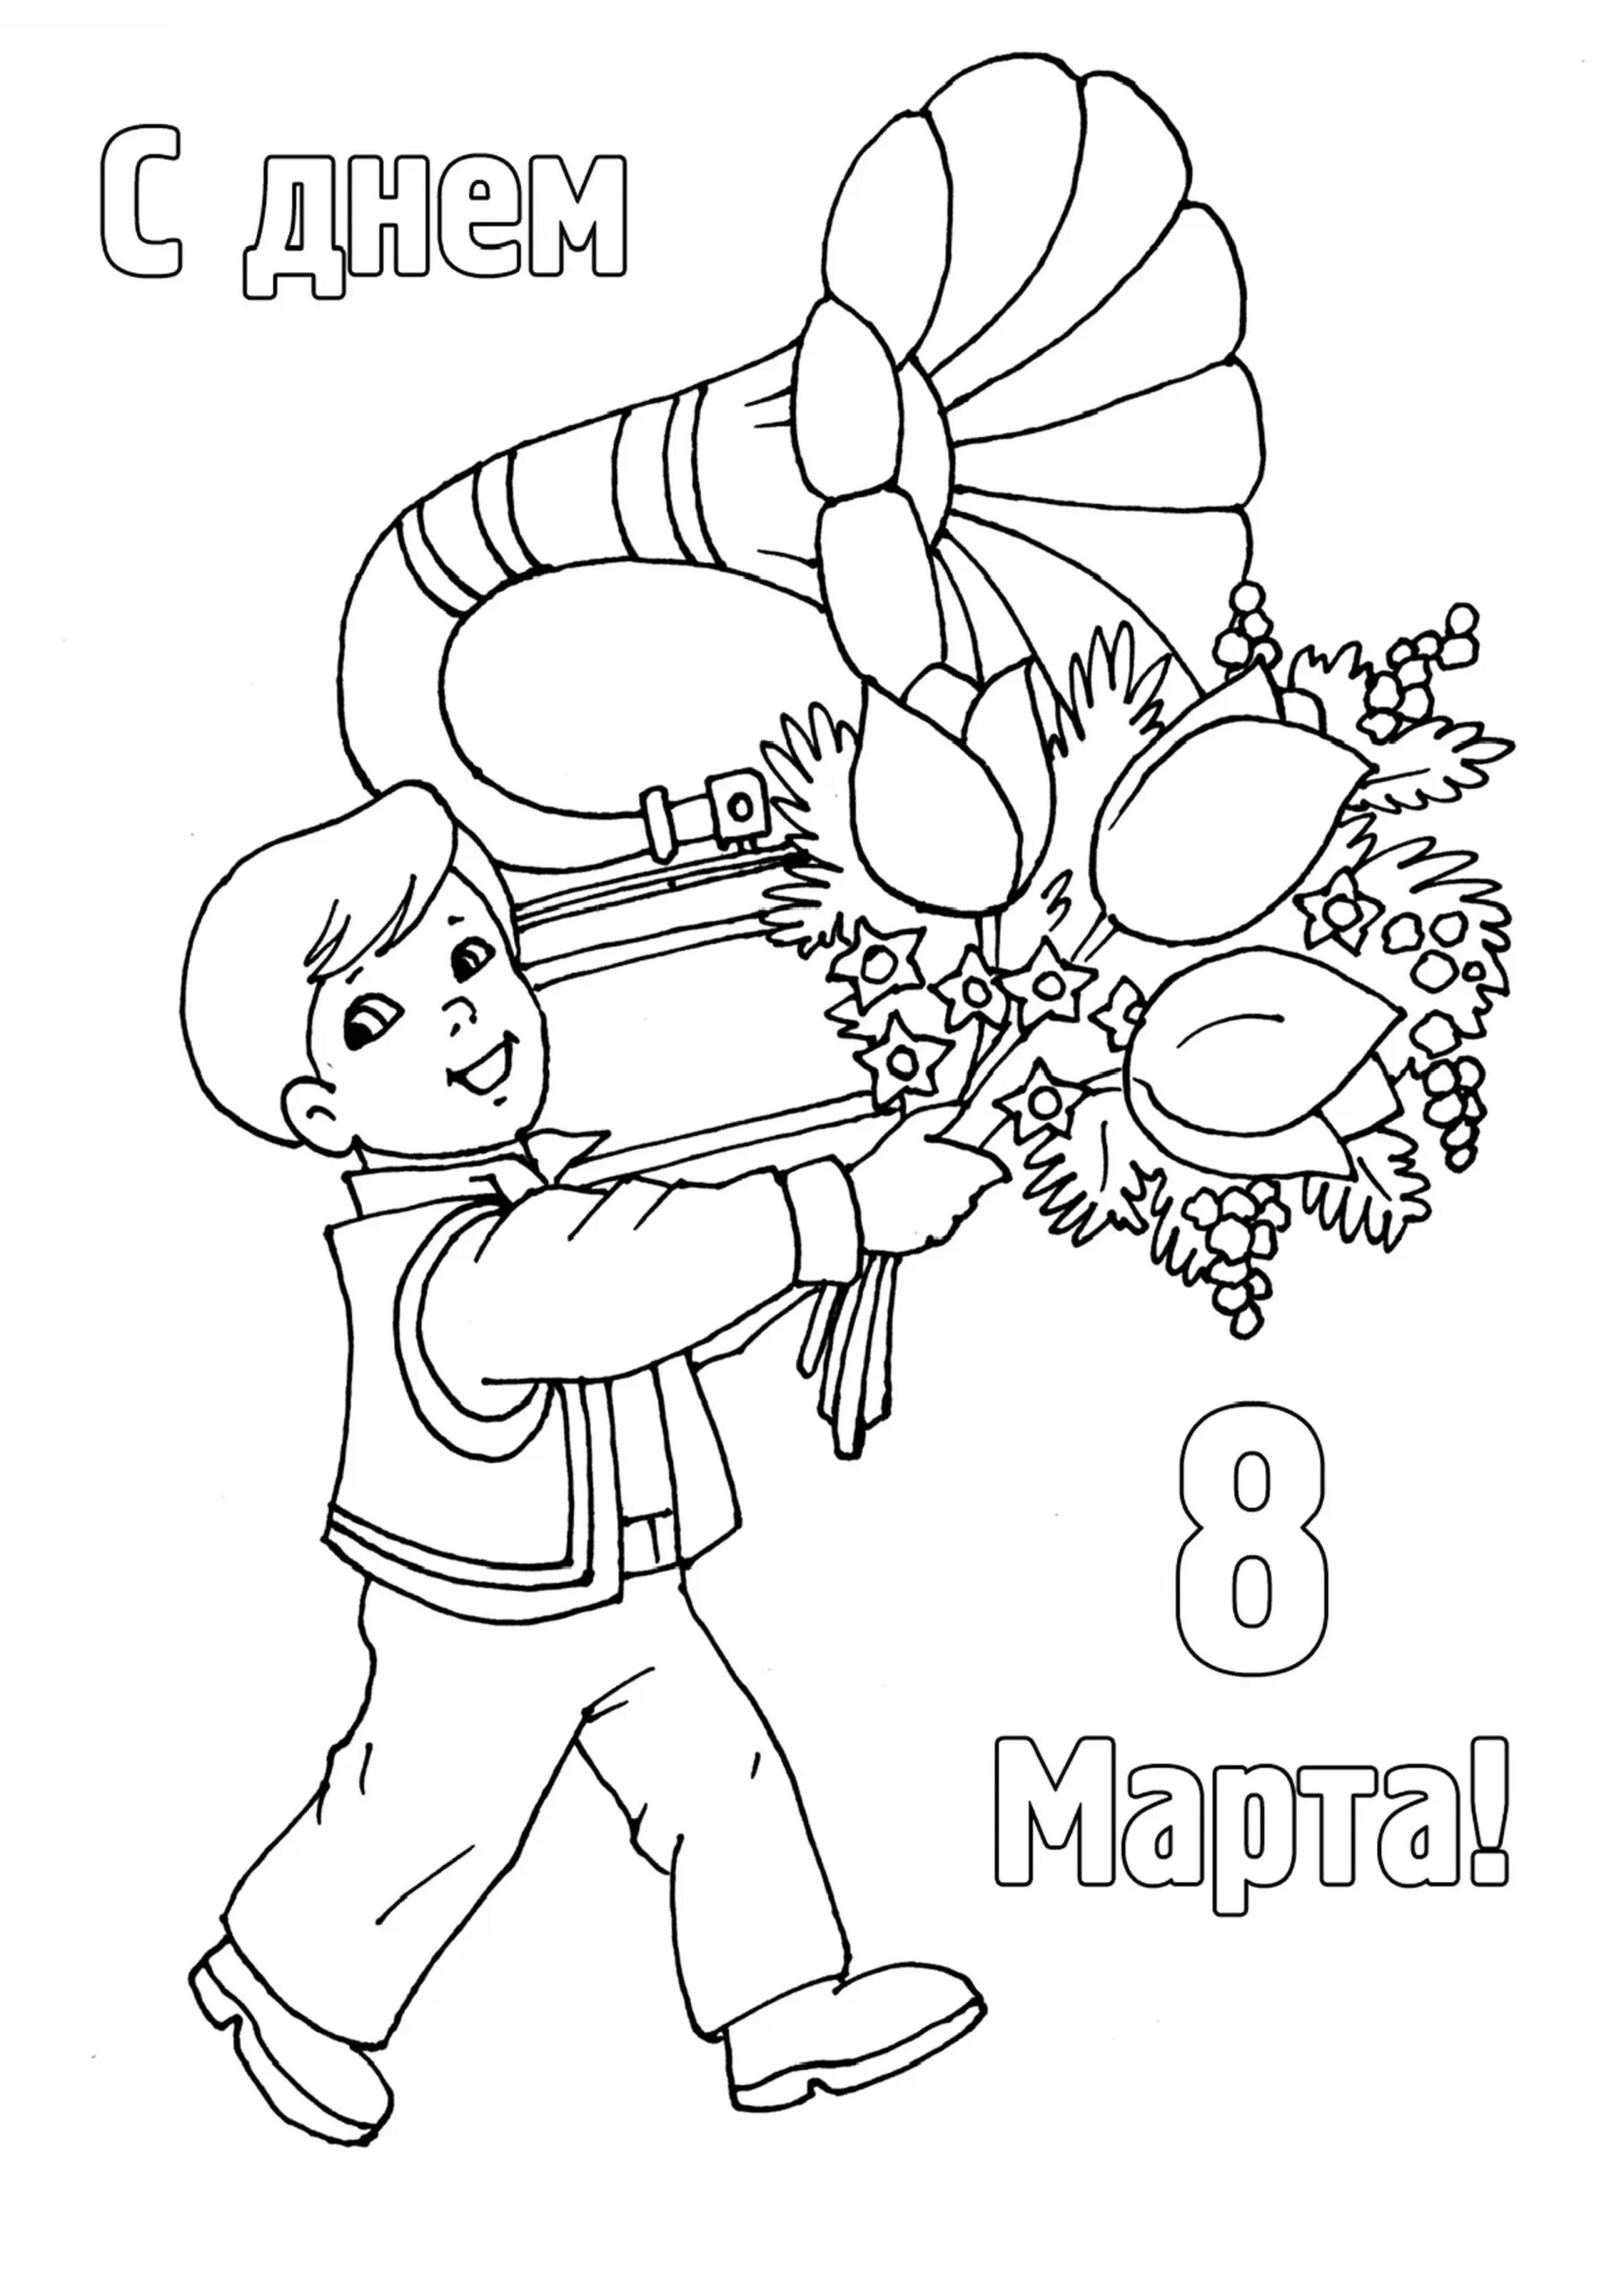 March 8 coloring book for children 7-8 years old